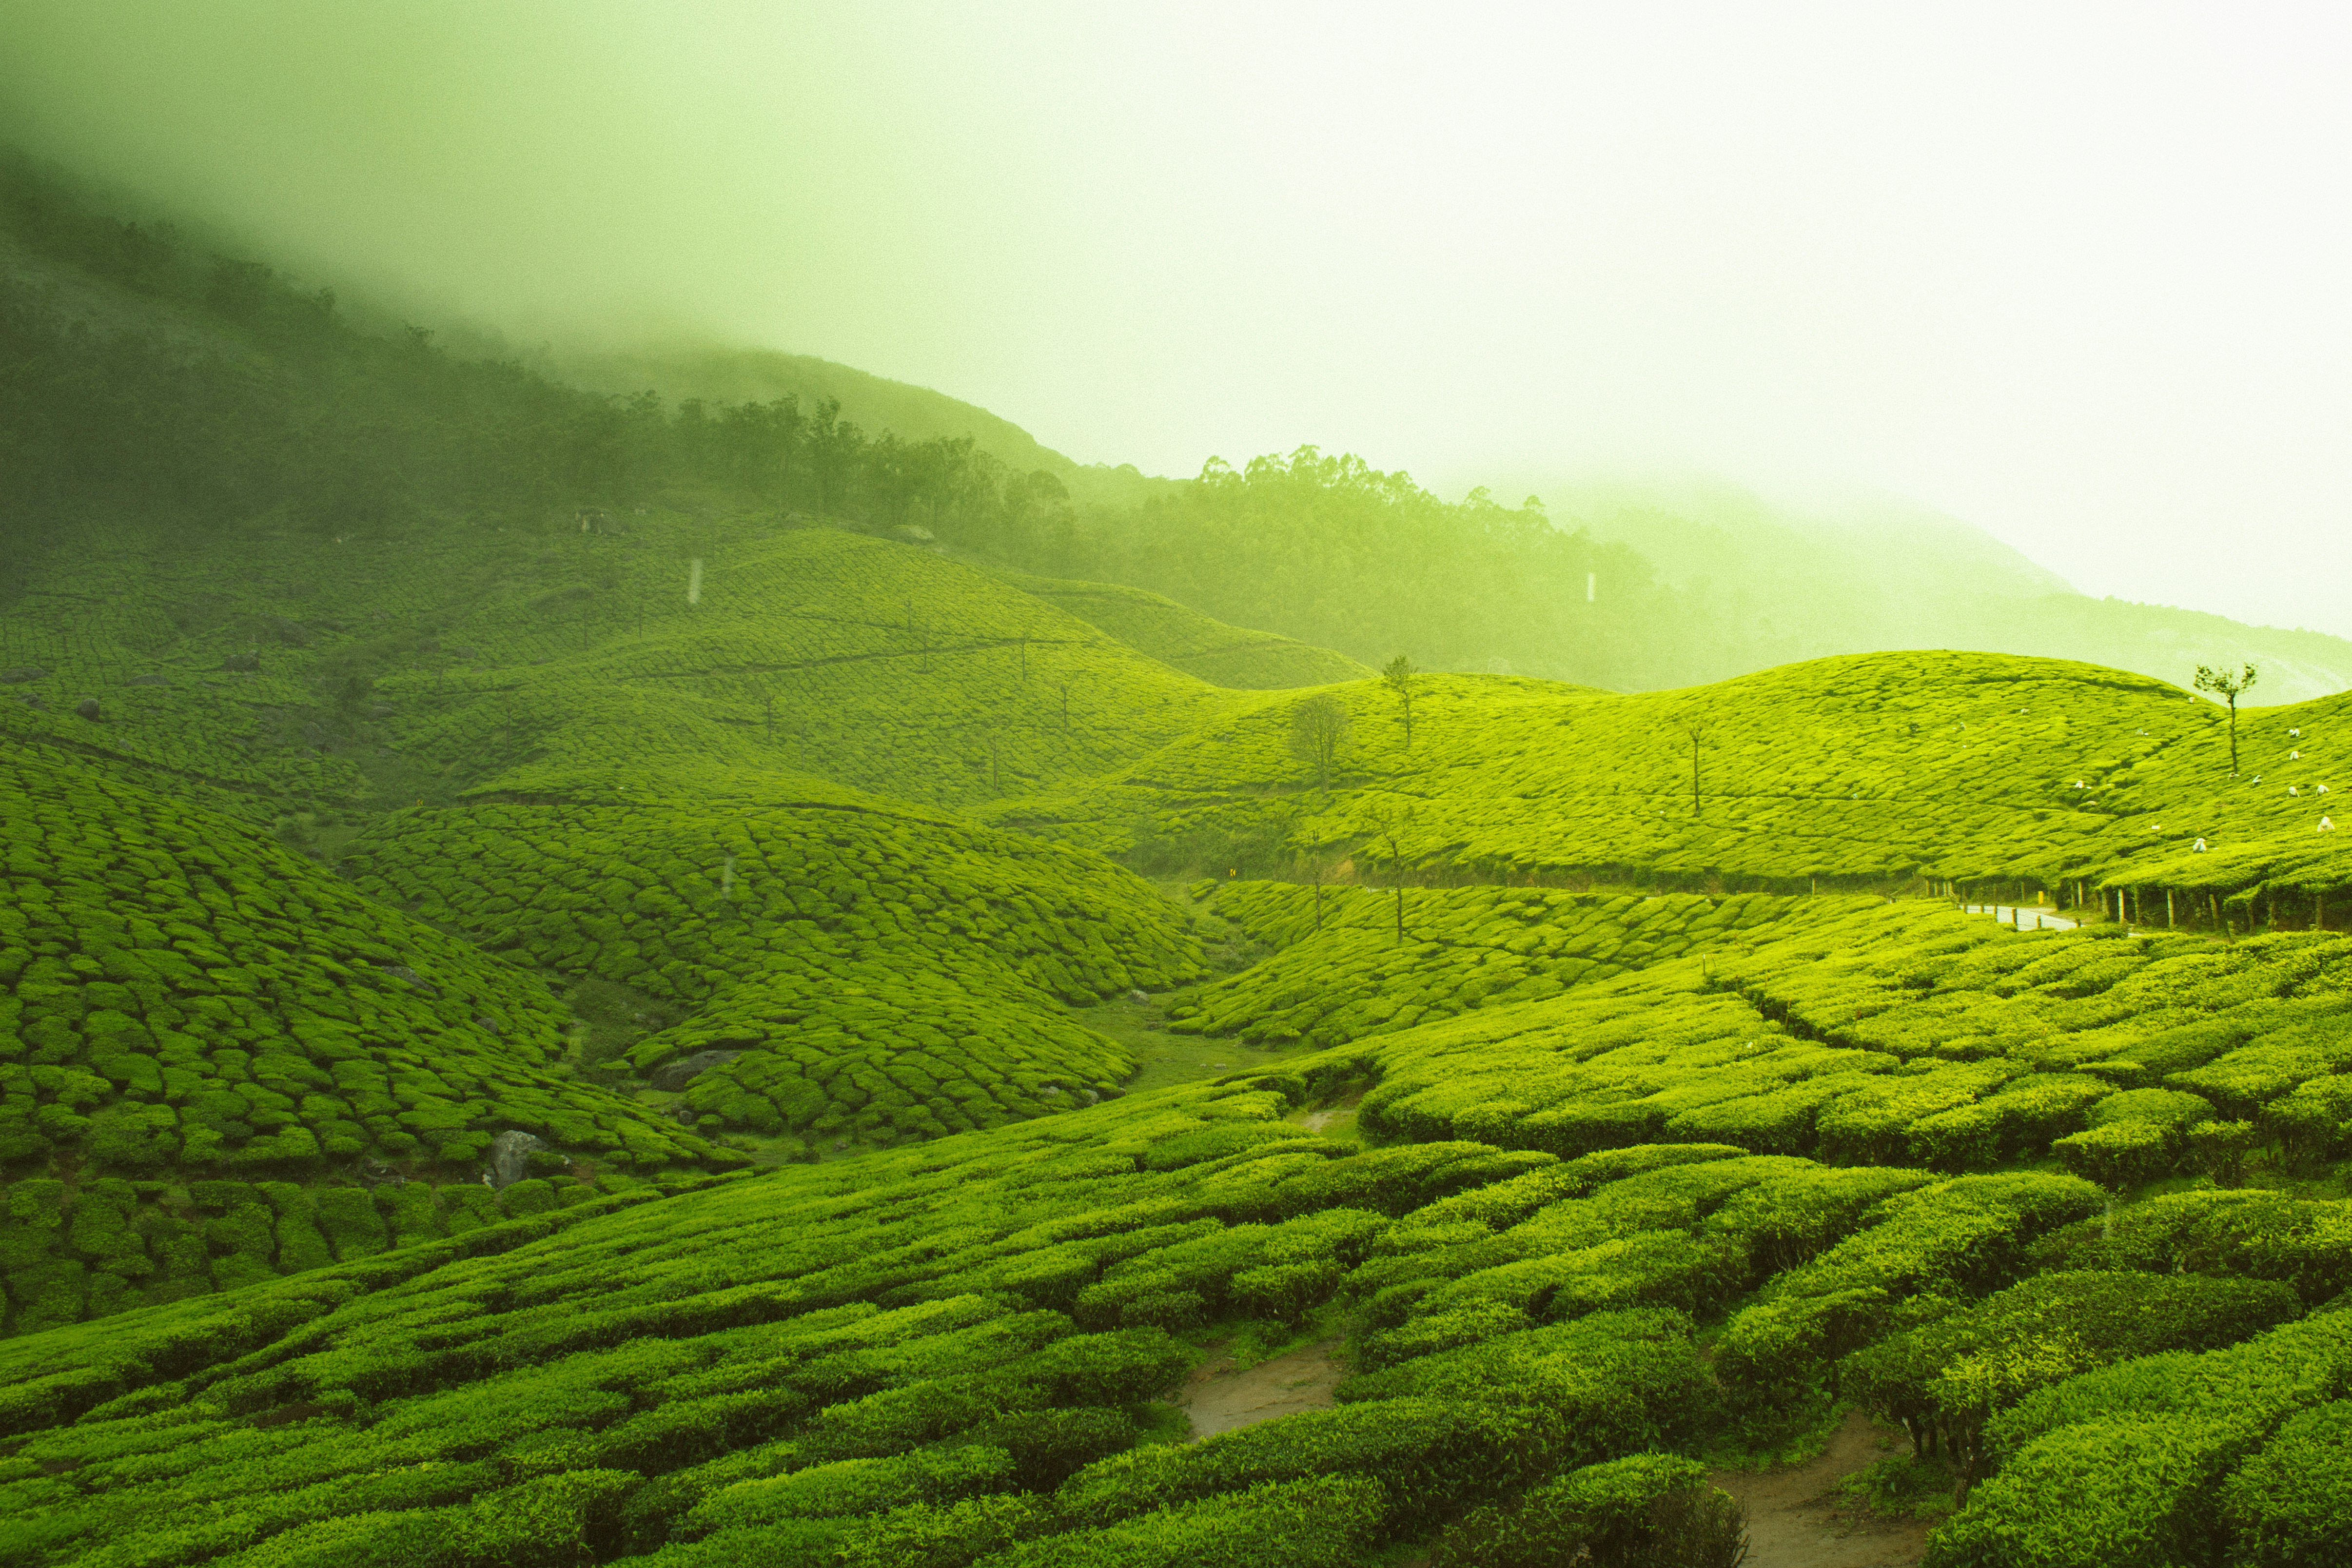 During my last trip across Kerala, India I came across this place amidst the tea gardens of Munnar. The place looked surreal filled with lushness of greenery. The little drizzle added to the beauty of the location. The relaxing feeling at the time was unforgettable. This photo always reminds me of what heaven on earth might look like :)